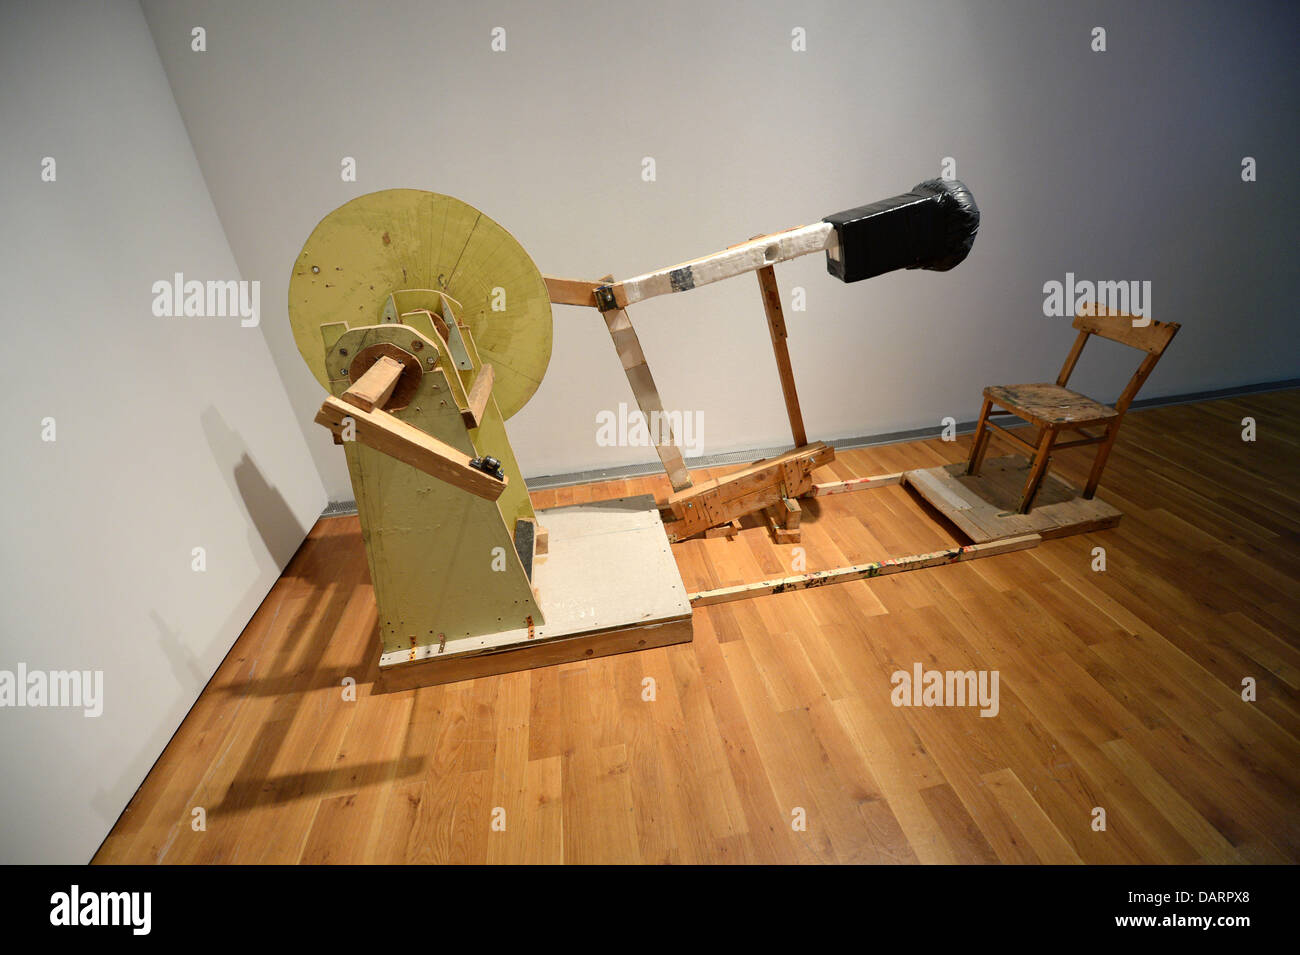 Wolfsburg, Germany. 18th July, 2013. The Nose Punch Machine by Szymon Kobylarz is shown at the exhibition 'Slapstick!' while a camera team is filming at the Kunstmuseum in Wolfsburg, Germany, 18 July 2013. In the exhibition objects, photographs, installations and films by artists such as John Bock, Rodney Graham, Wilfredo Prieto, Erwin Wurm, Fischli/Weiss, Bruce Nauman or Francis Alys are combined with scenes from movies with Charlie Chaplin, Buster Keaton, Harold Lloyd or Laurel & Hardy. Photo: PETER STEFFEN/dpa/Alamy Live News Stock Photo